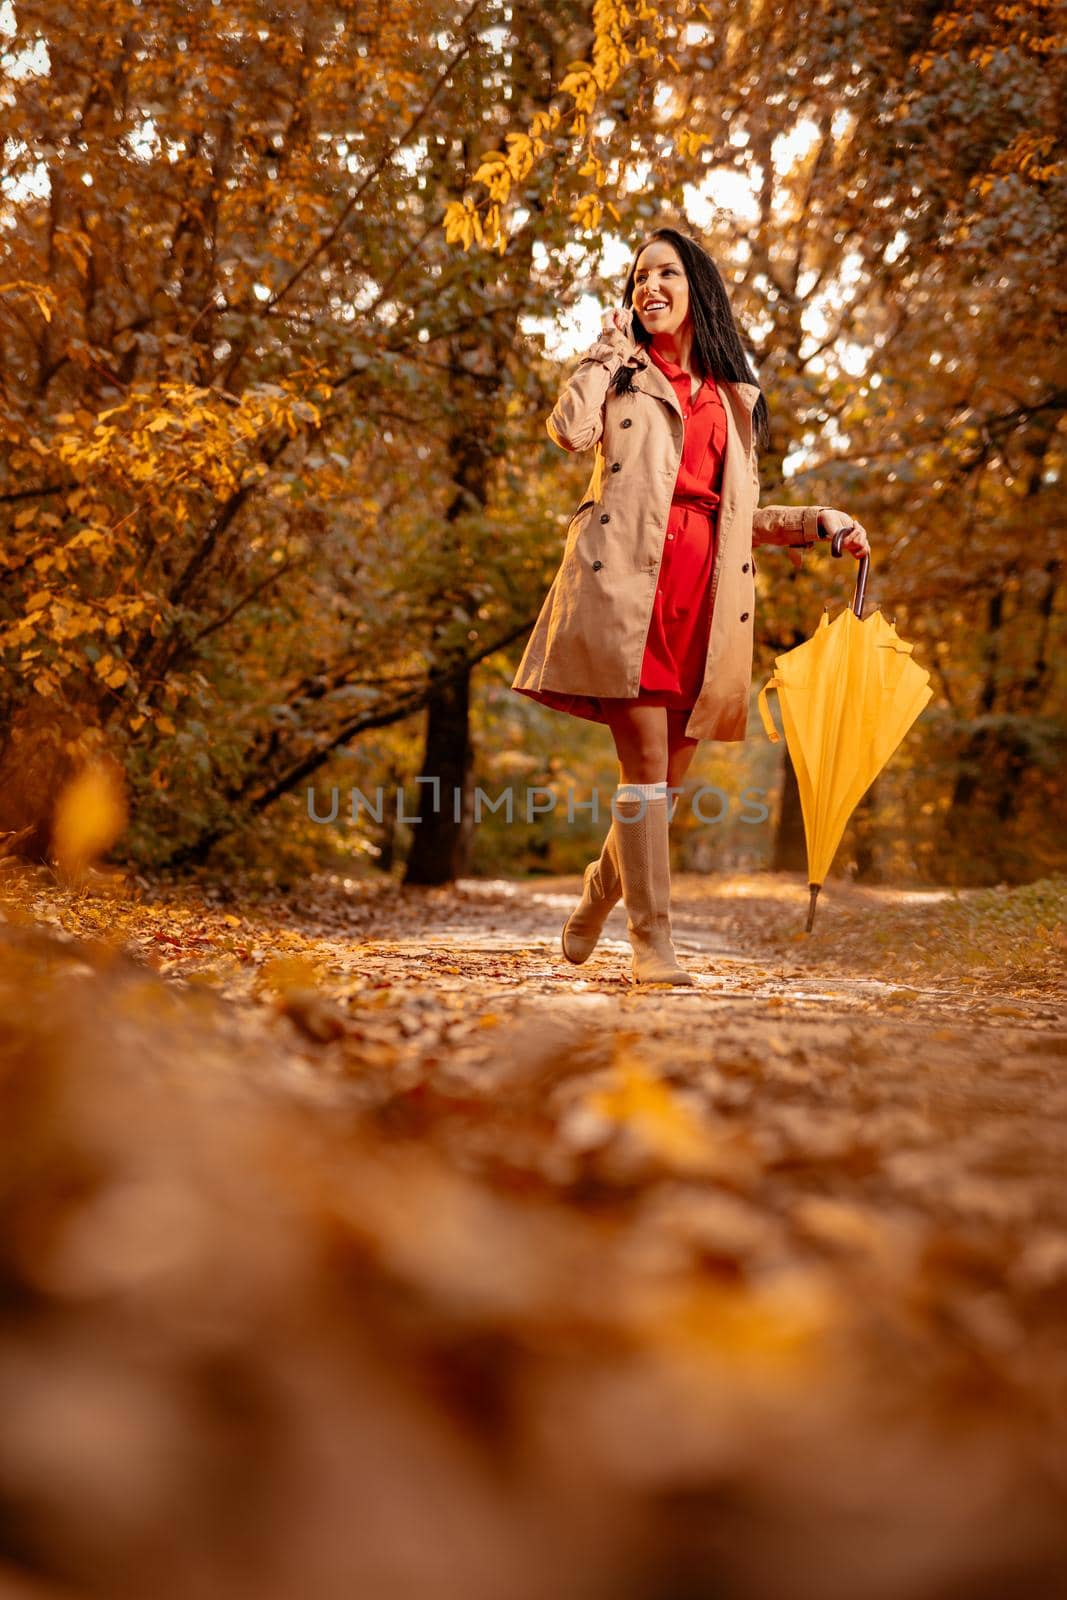 Happy young woman in red dress talking on smartphone walking in autumn sunny park, holding folded yellow umbrella.